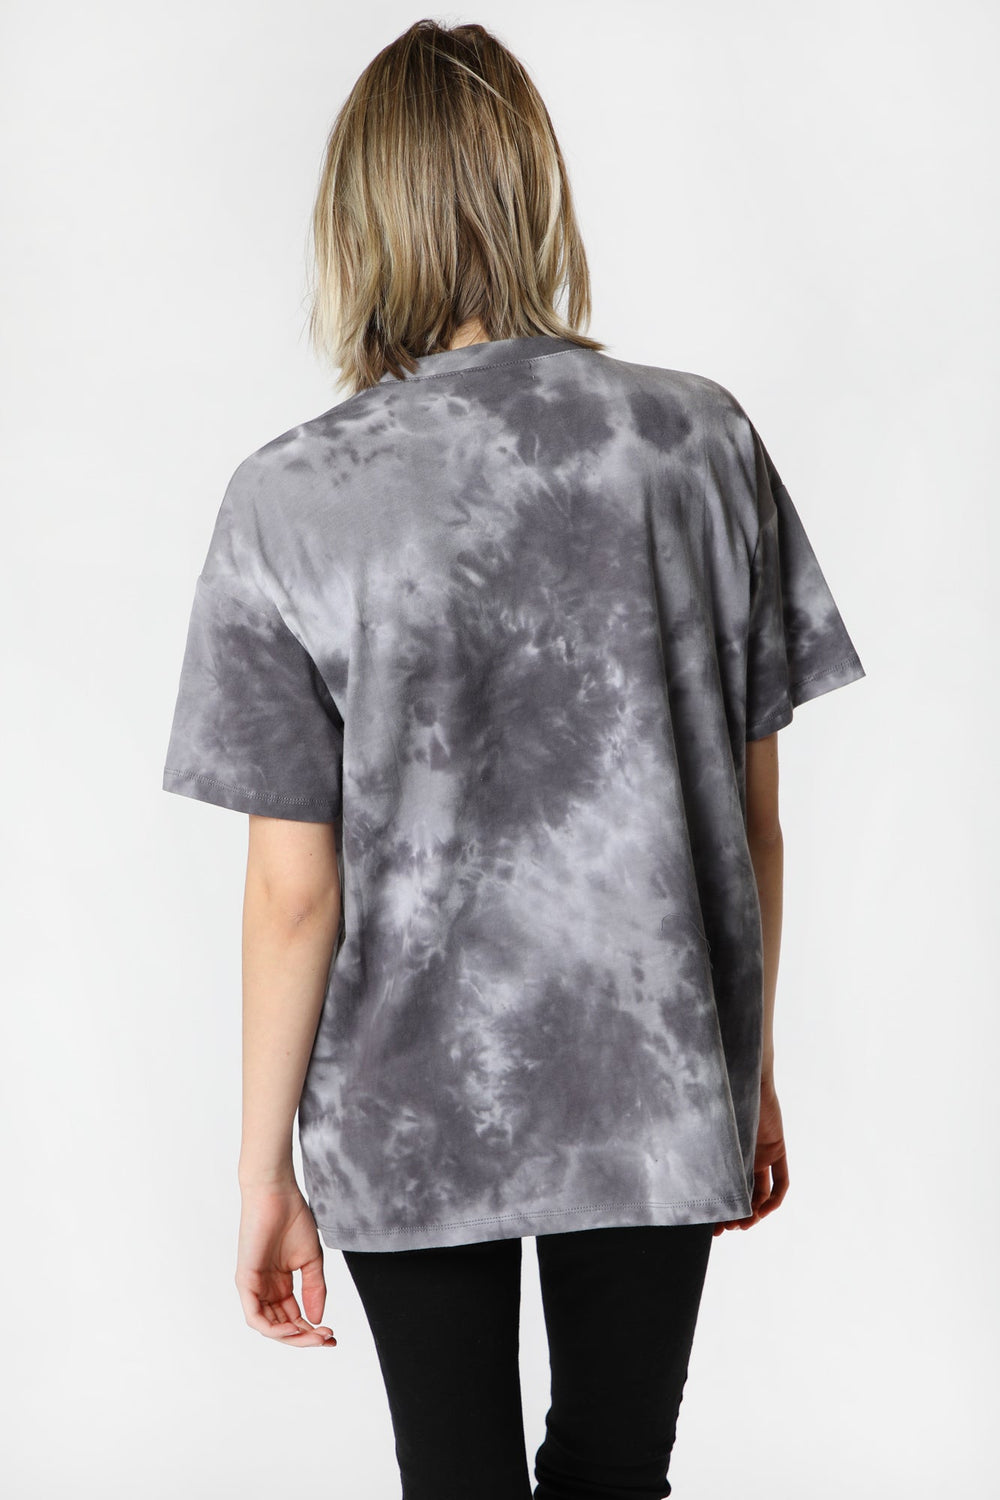 Womens Sovrn Voices Oversized Tie-Dye T-Shirt Womens Sovrn Voices Oversized Tie-Dye T-Shirt